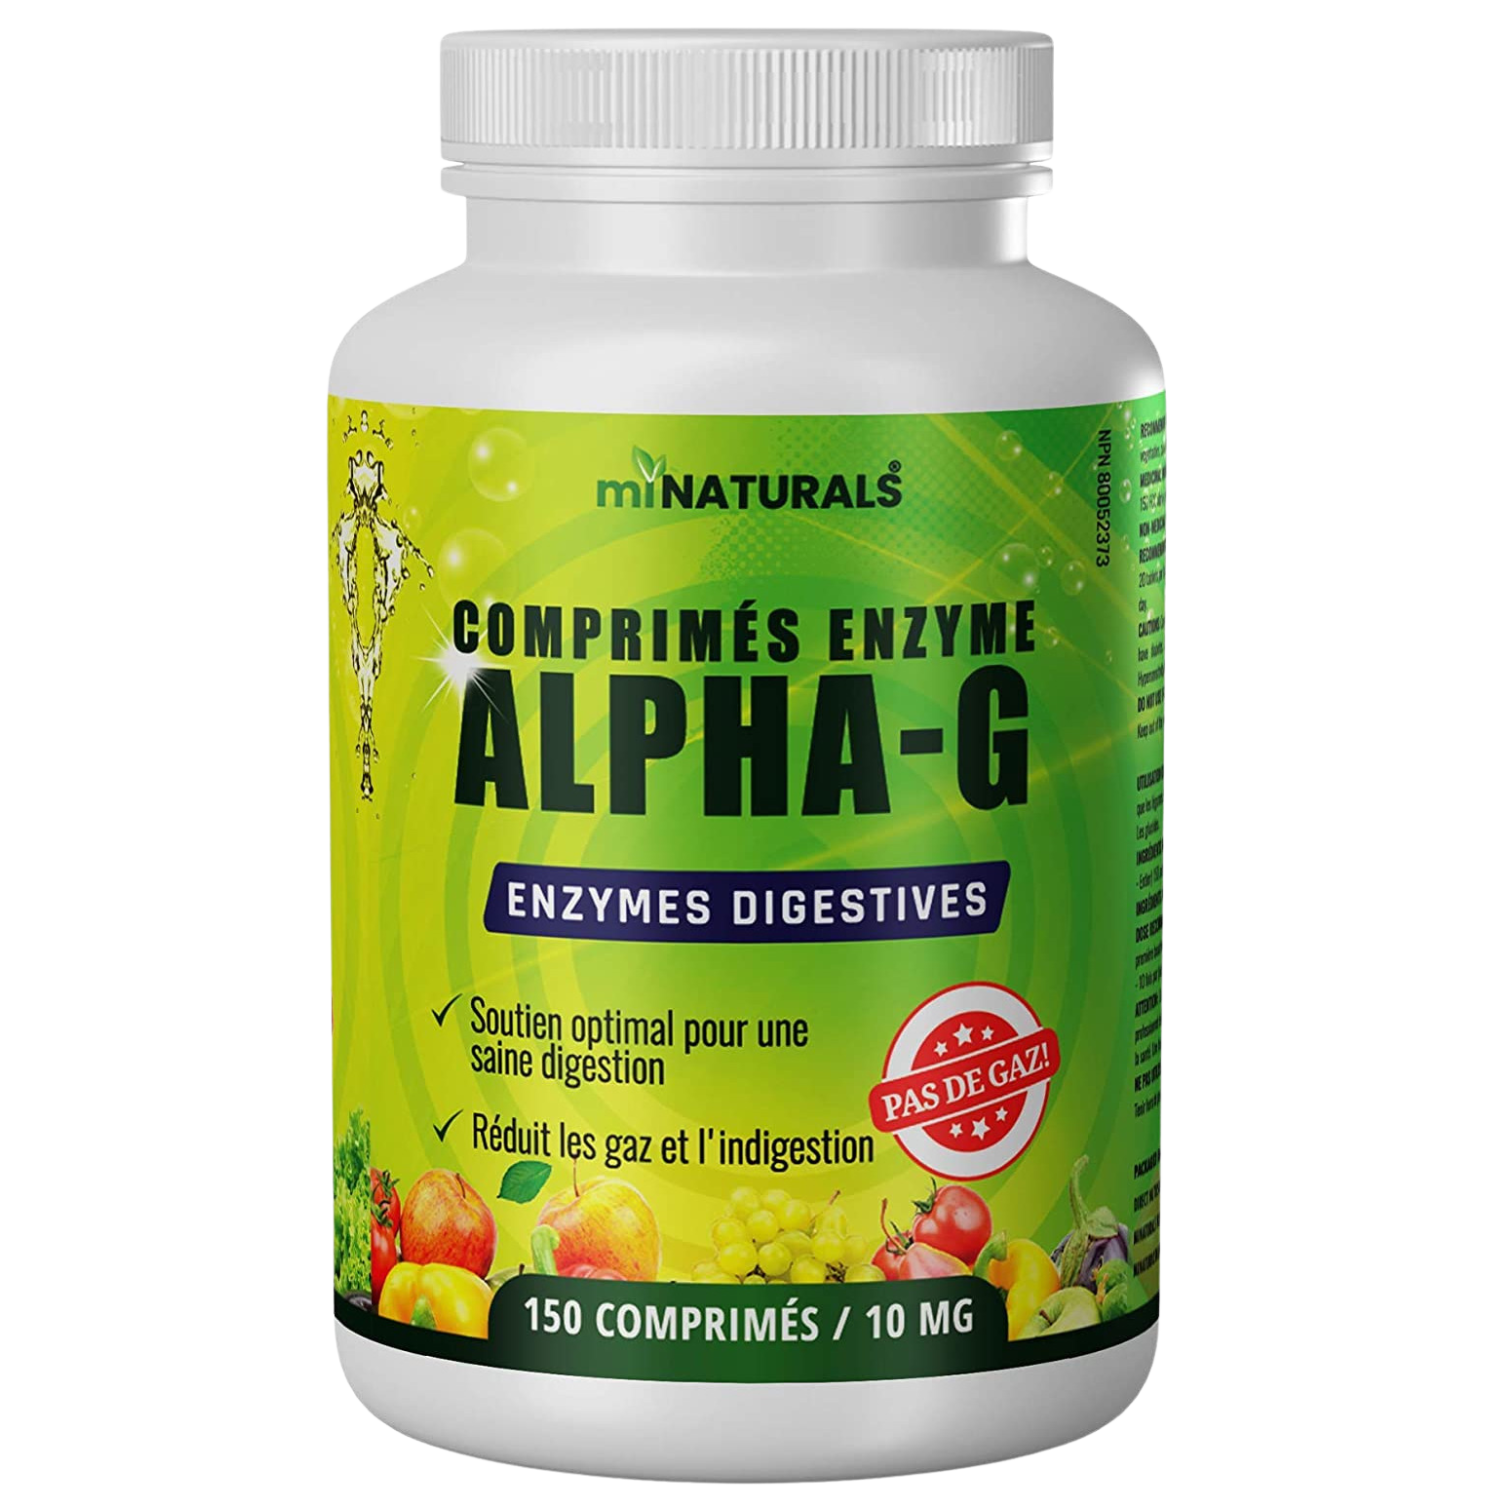 Alpha-G for Gas Relief - 150 Tablets